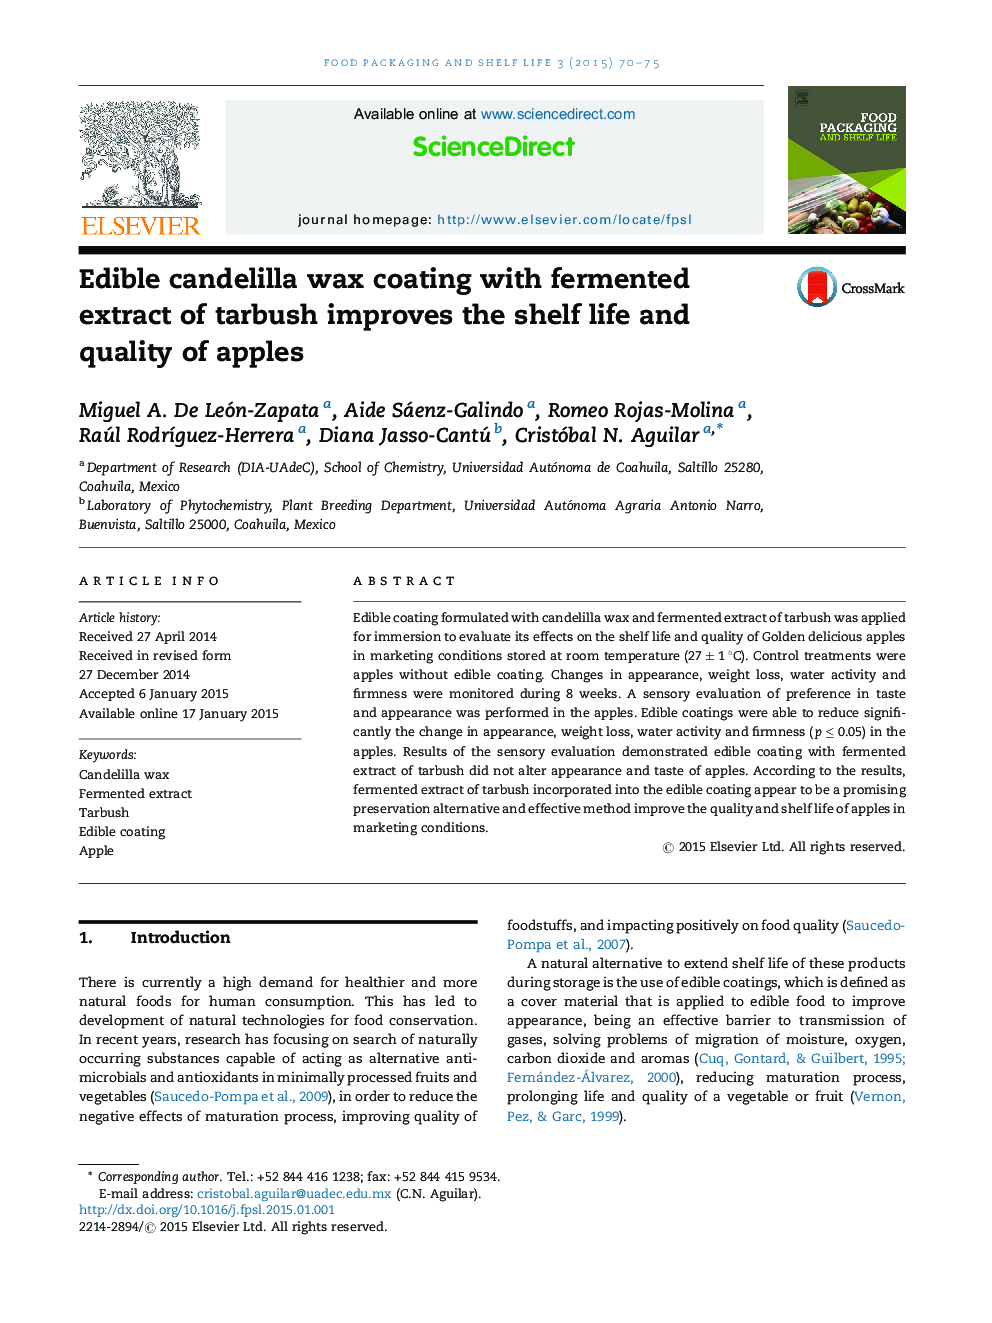 Edible candelilla wax coating with fermented extract of tarbush improves the shelf life and quality of apples